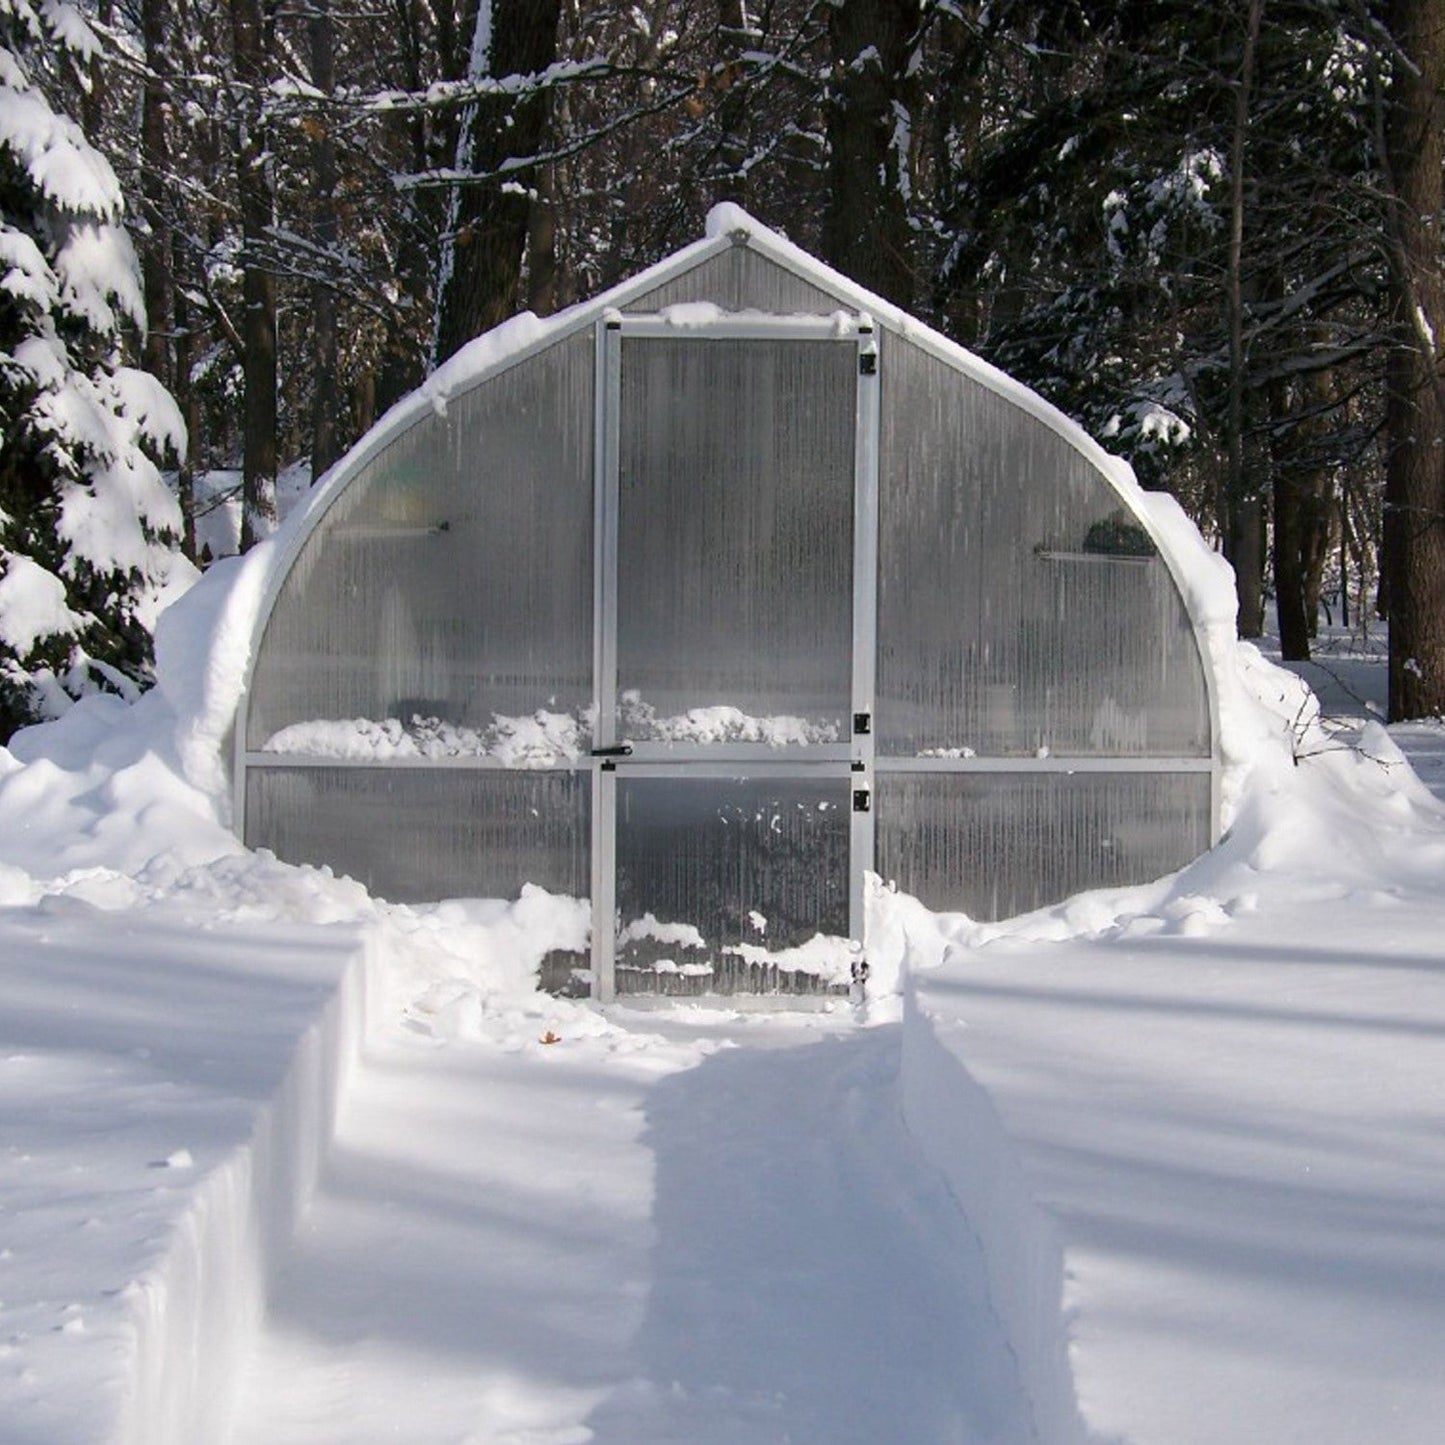 Hoklartherm | 14ft x 29ft 6in x 9ft 10in RIGA XL9 Professional Greenhouse Kit With 16mm Triple-wall Polycarbonate Glazing